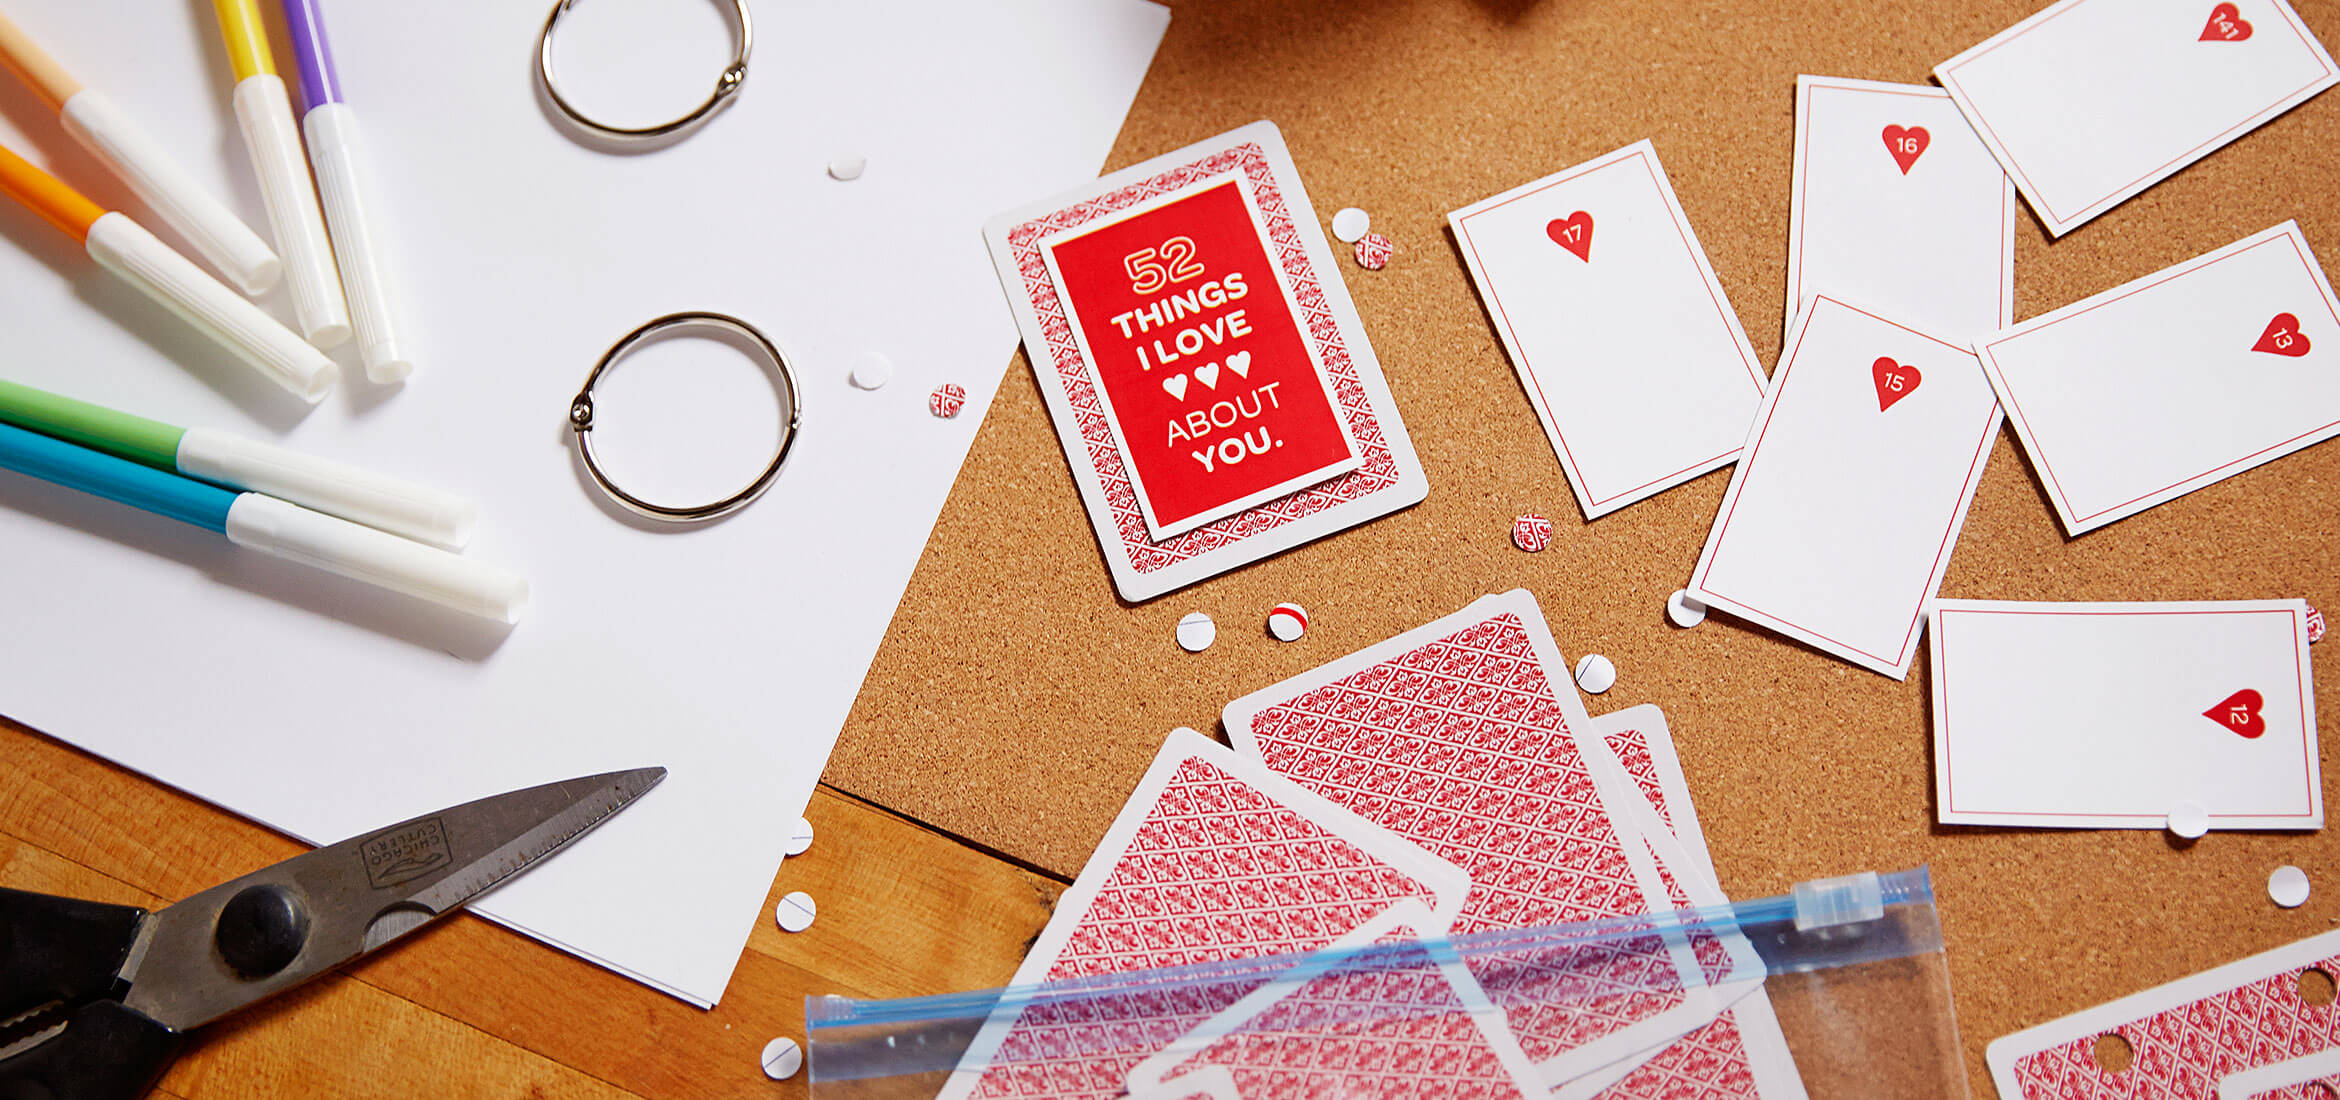 Ziploc® | Small But Mighty Ways To Say I Love You| Ziploc Regarding 52 Things I Love About You Deck Of Cards Template